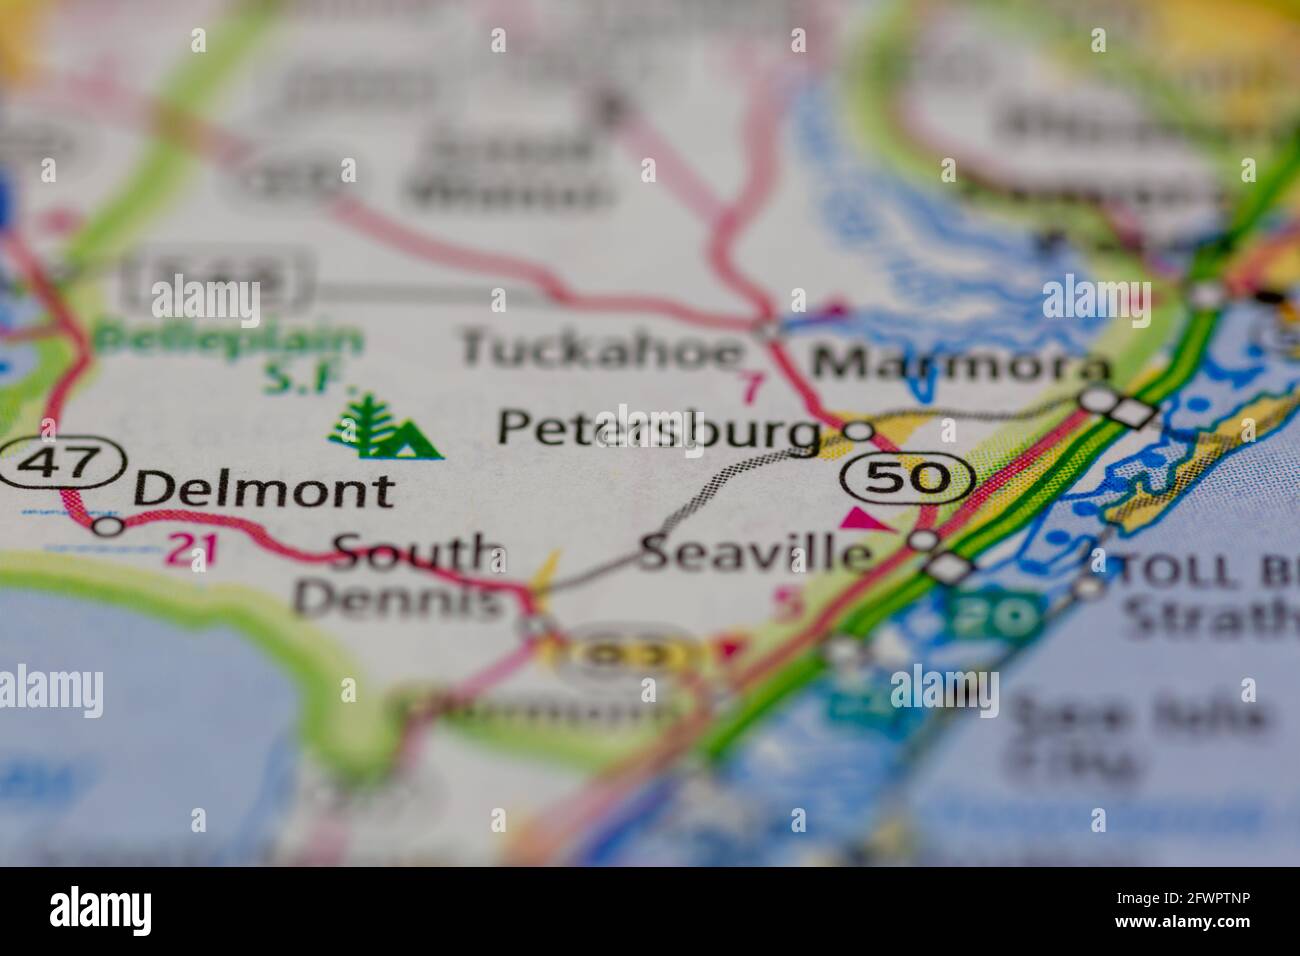 Petersburg New Jersey Usa Shown On A Geography Map Or Road Map 2FWPTNP 